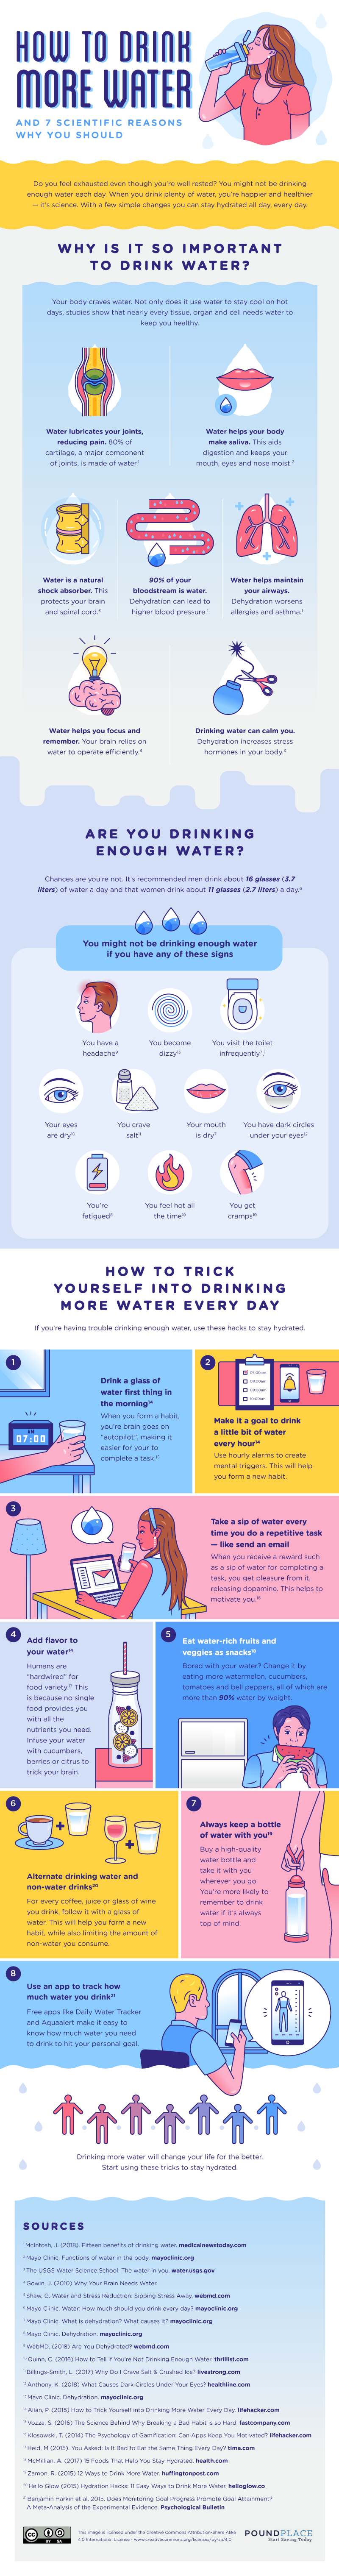 How-to-Drink-More-Water-1-1